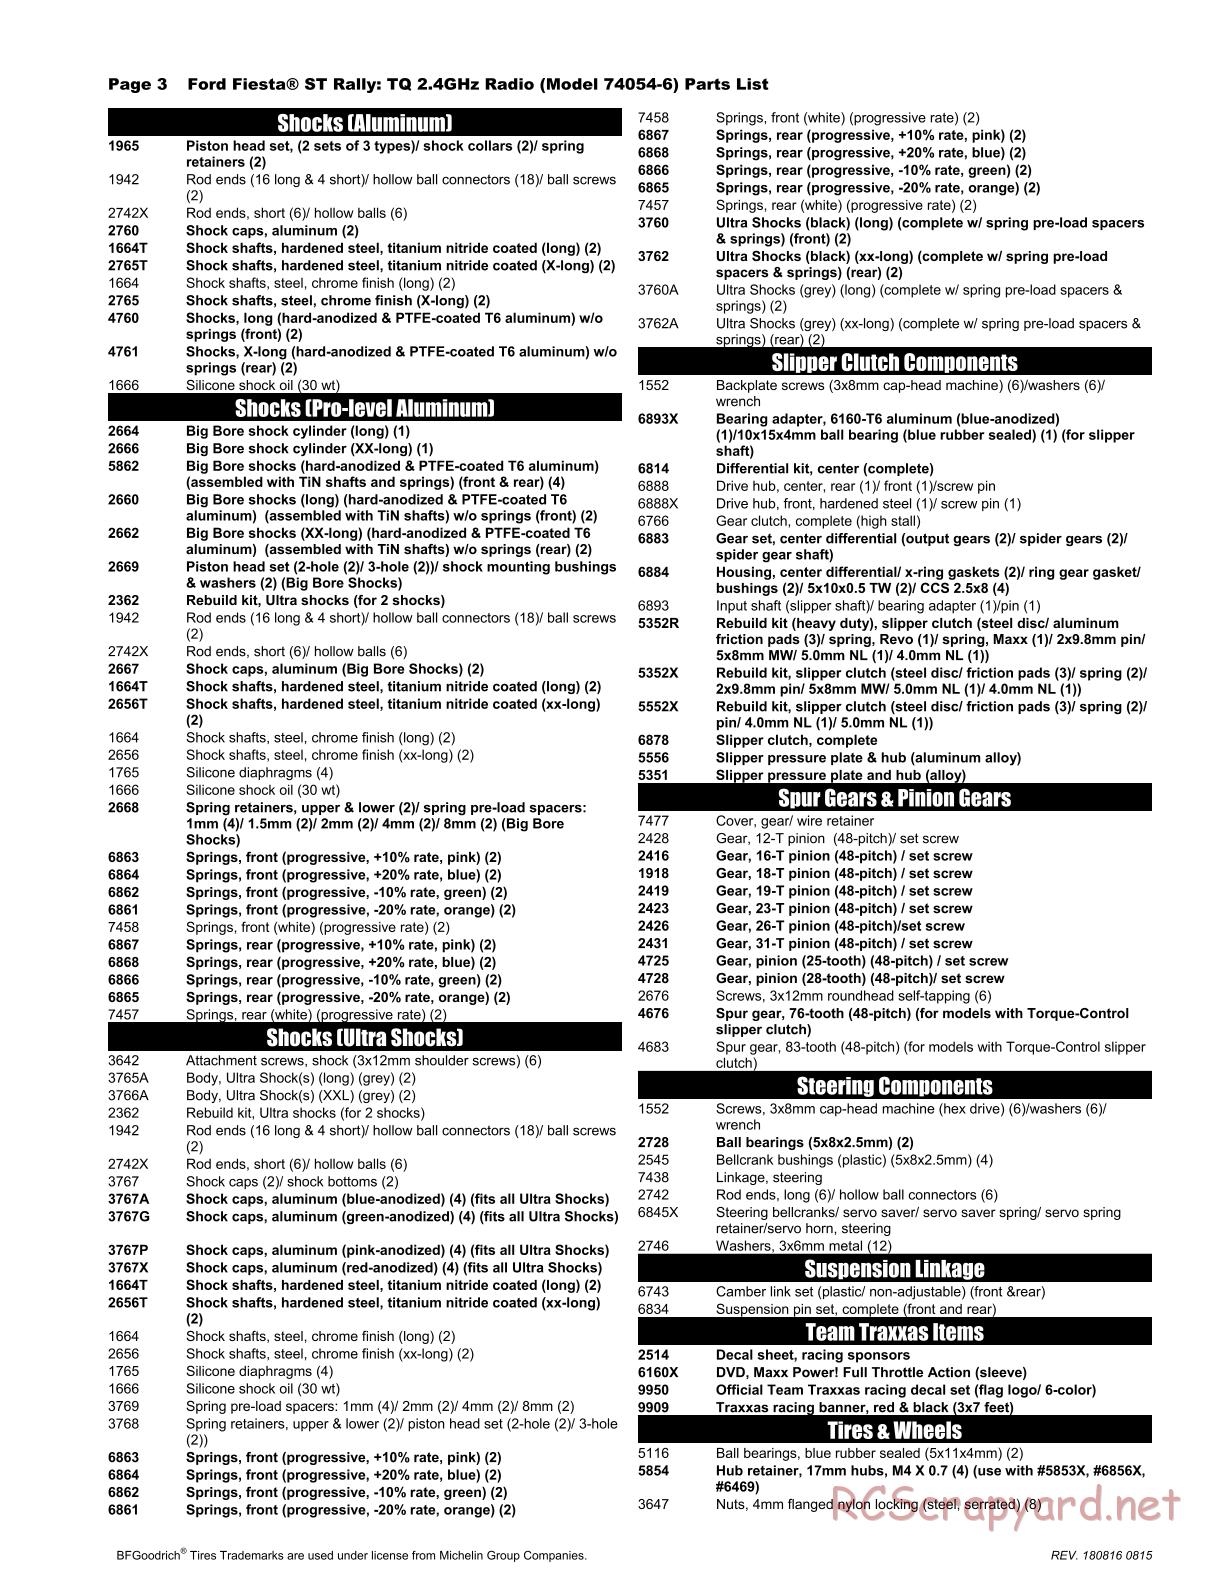 Traxxas - Ford Fiesta ST - NOS Deegan 38 Rally - Parts List - Page 3